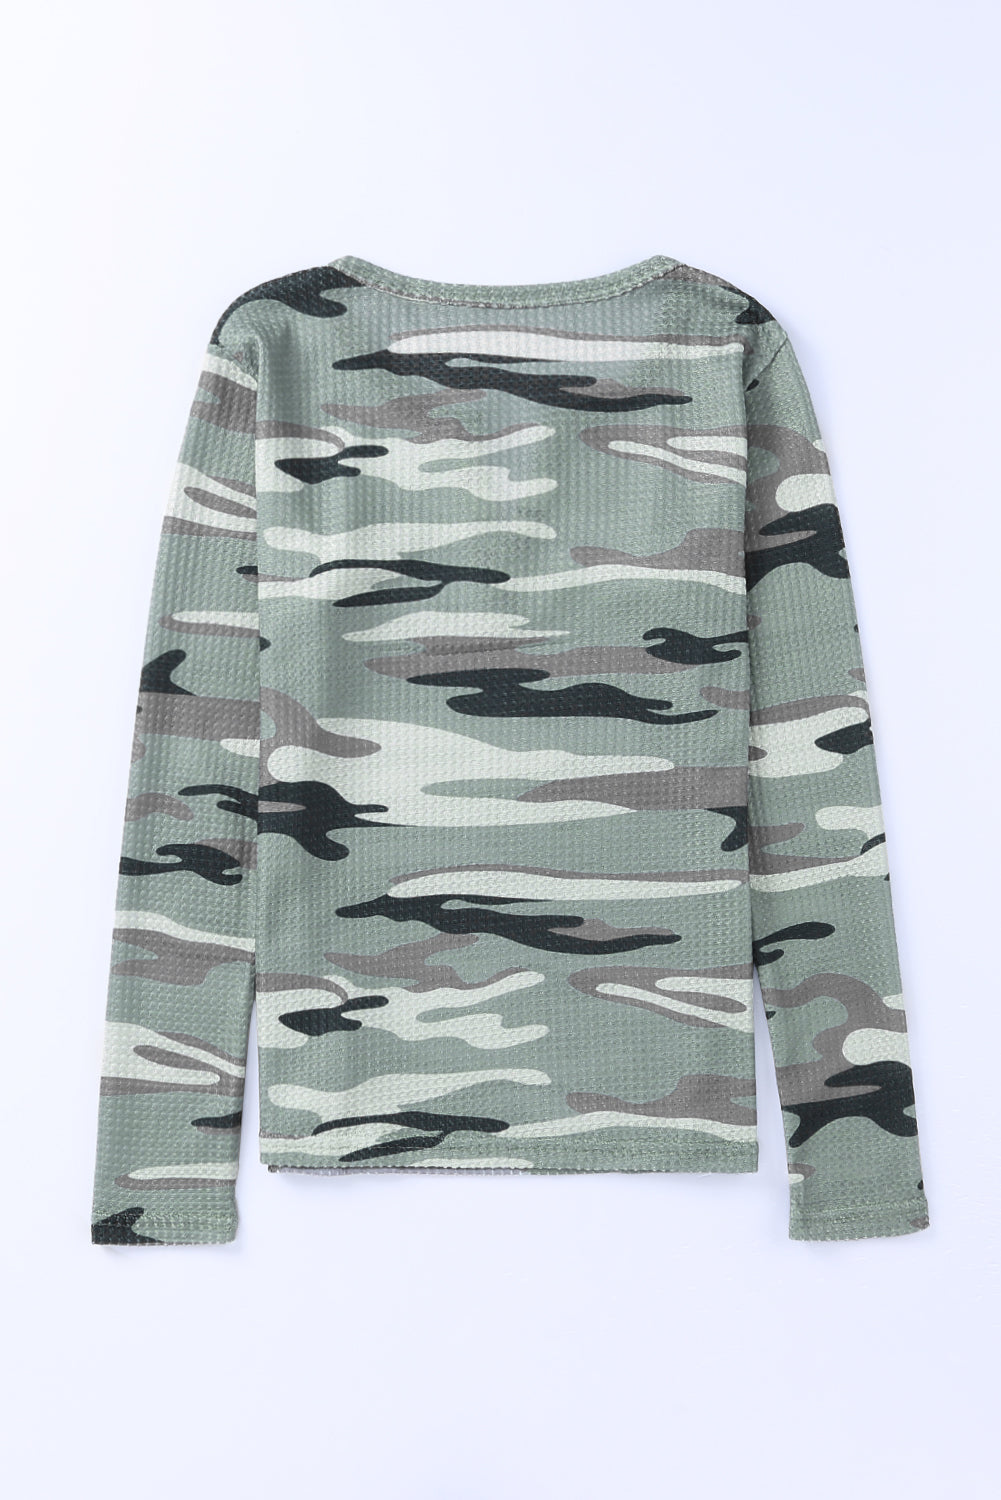 Green Camouflage Waffle Knit V Neck Top Long Sleeve Tops JT's Designer Fashion